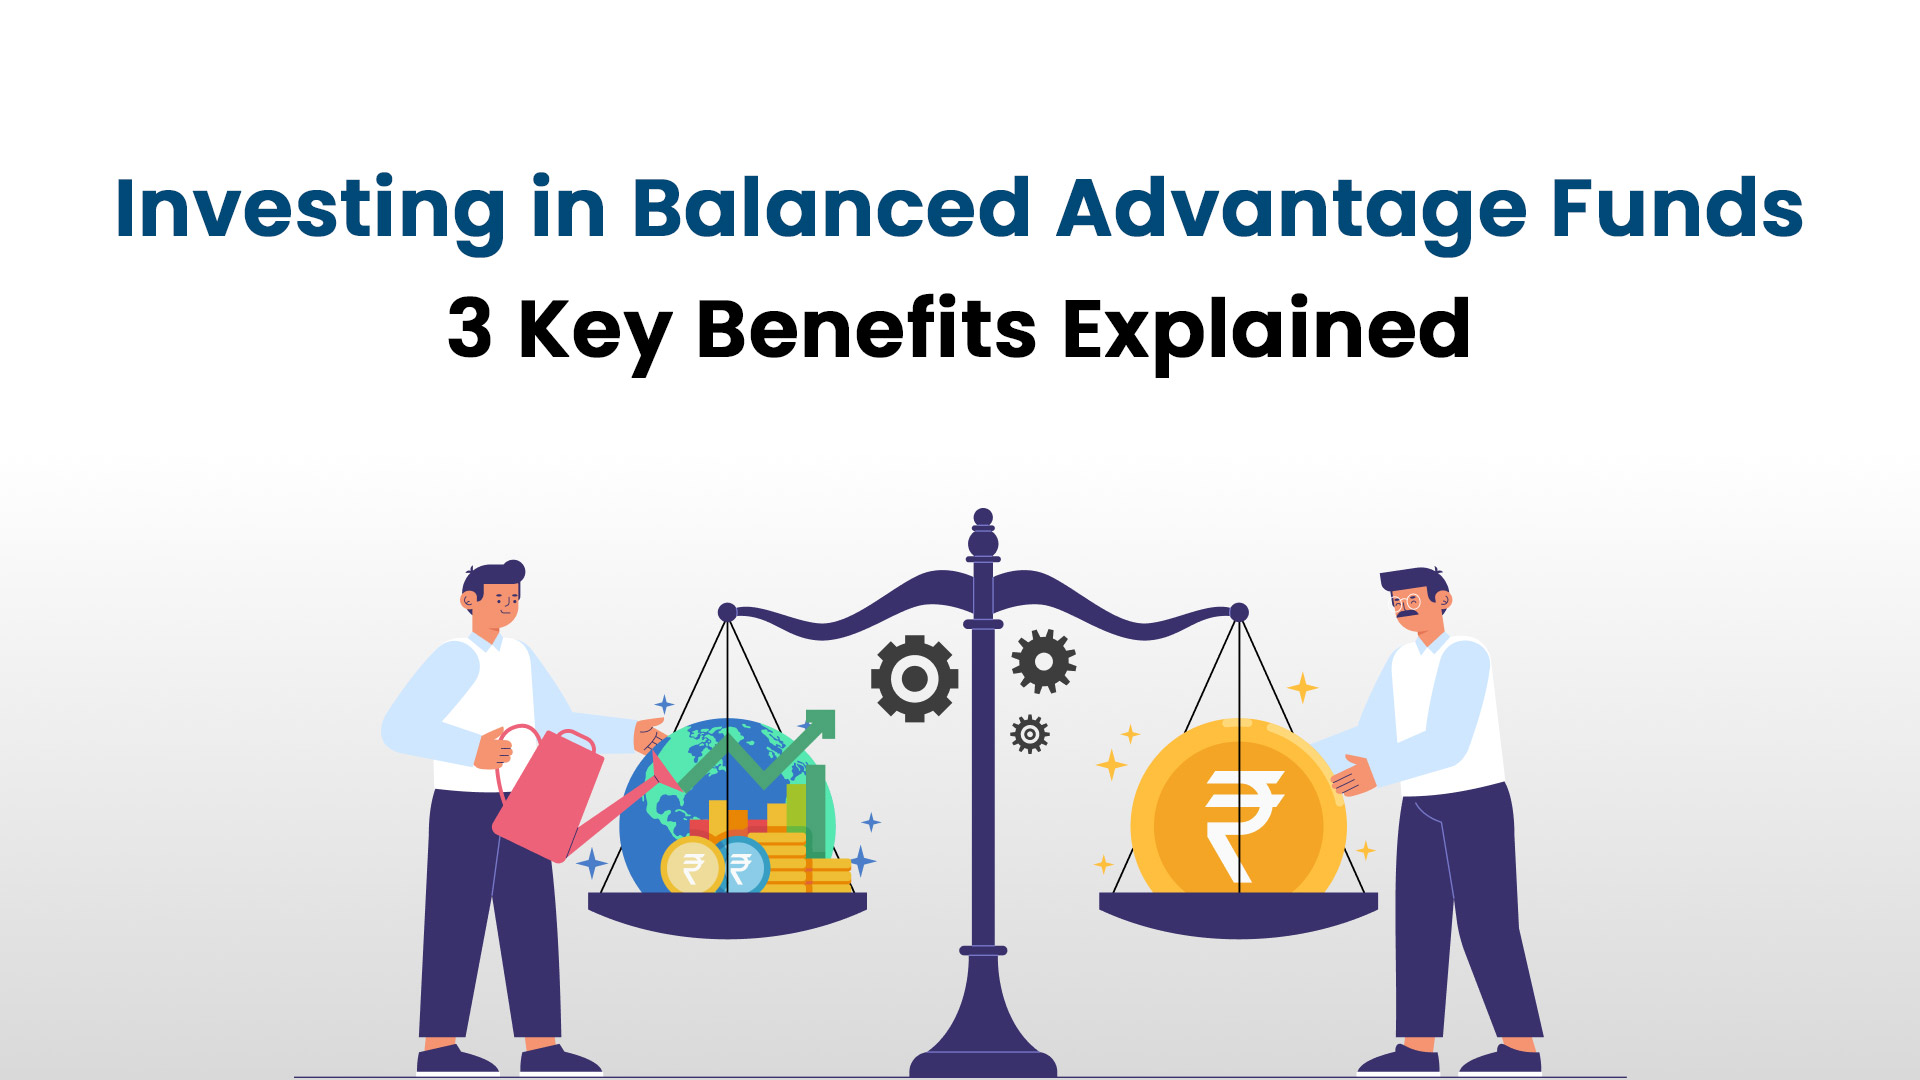 Investing in balanced advantage funds: 3 key benefits explained